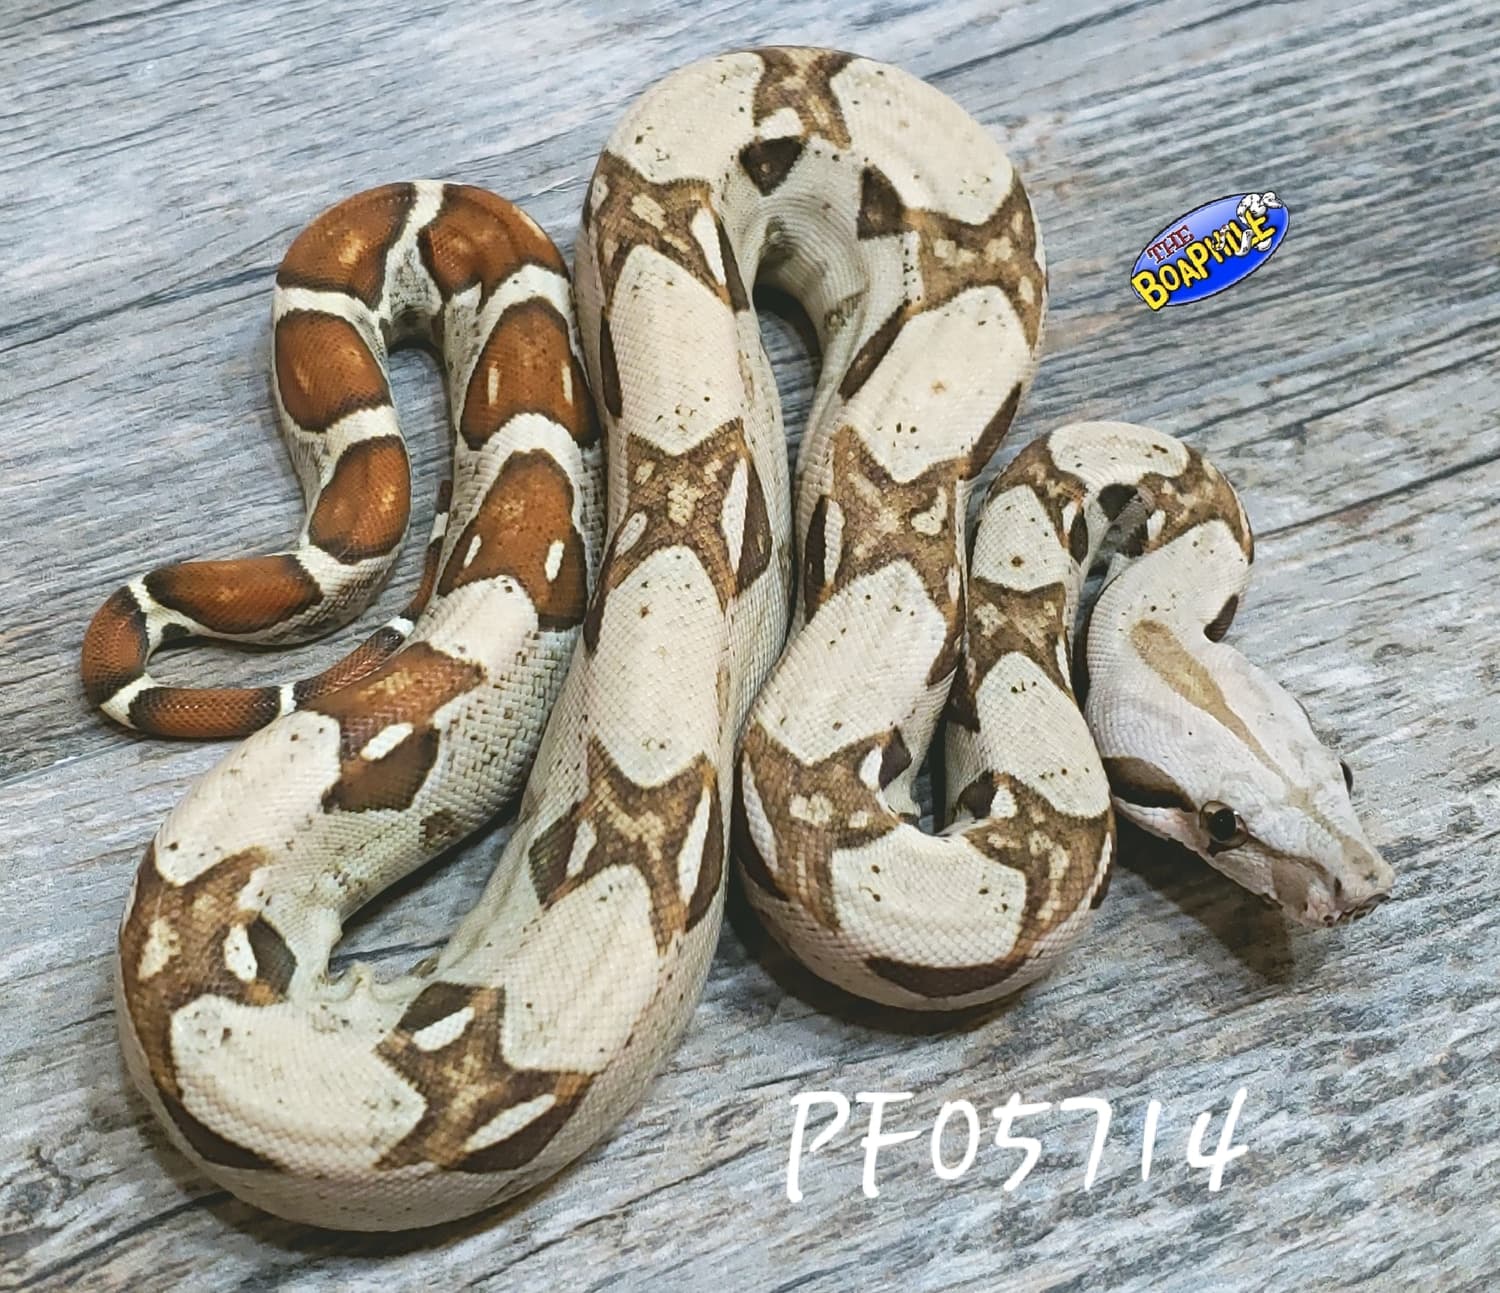 Prodigy Boa Constrictor by Boaphile Jeff Ronne